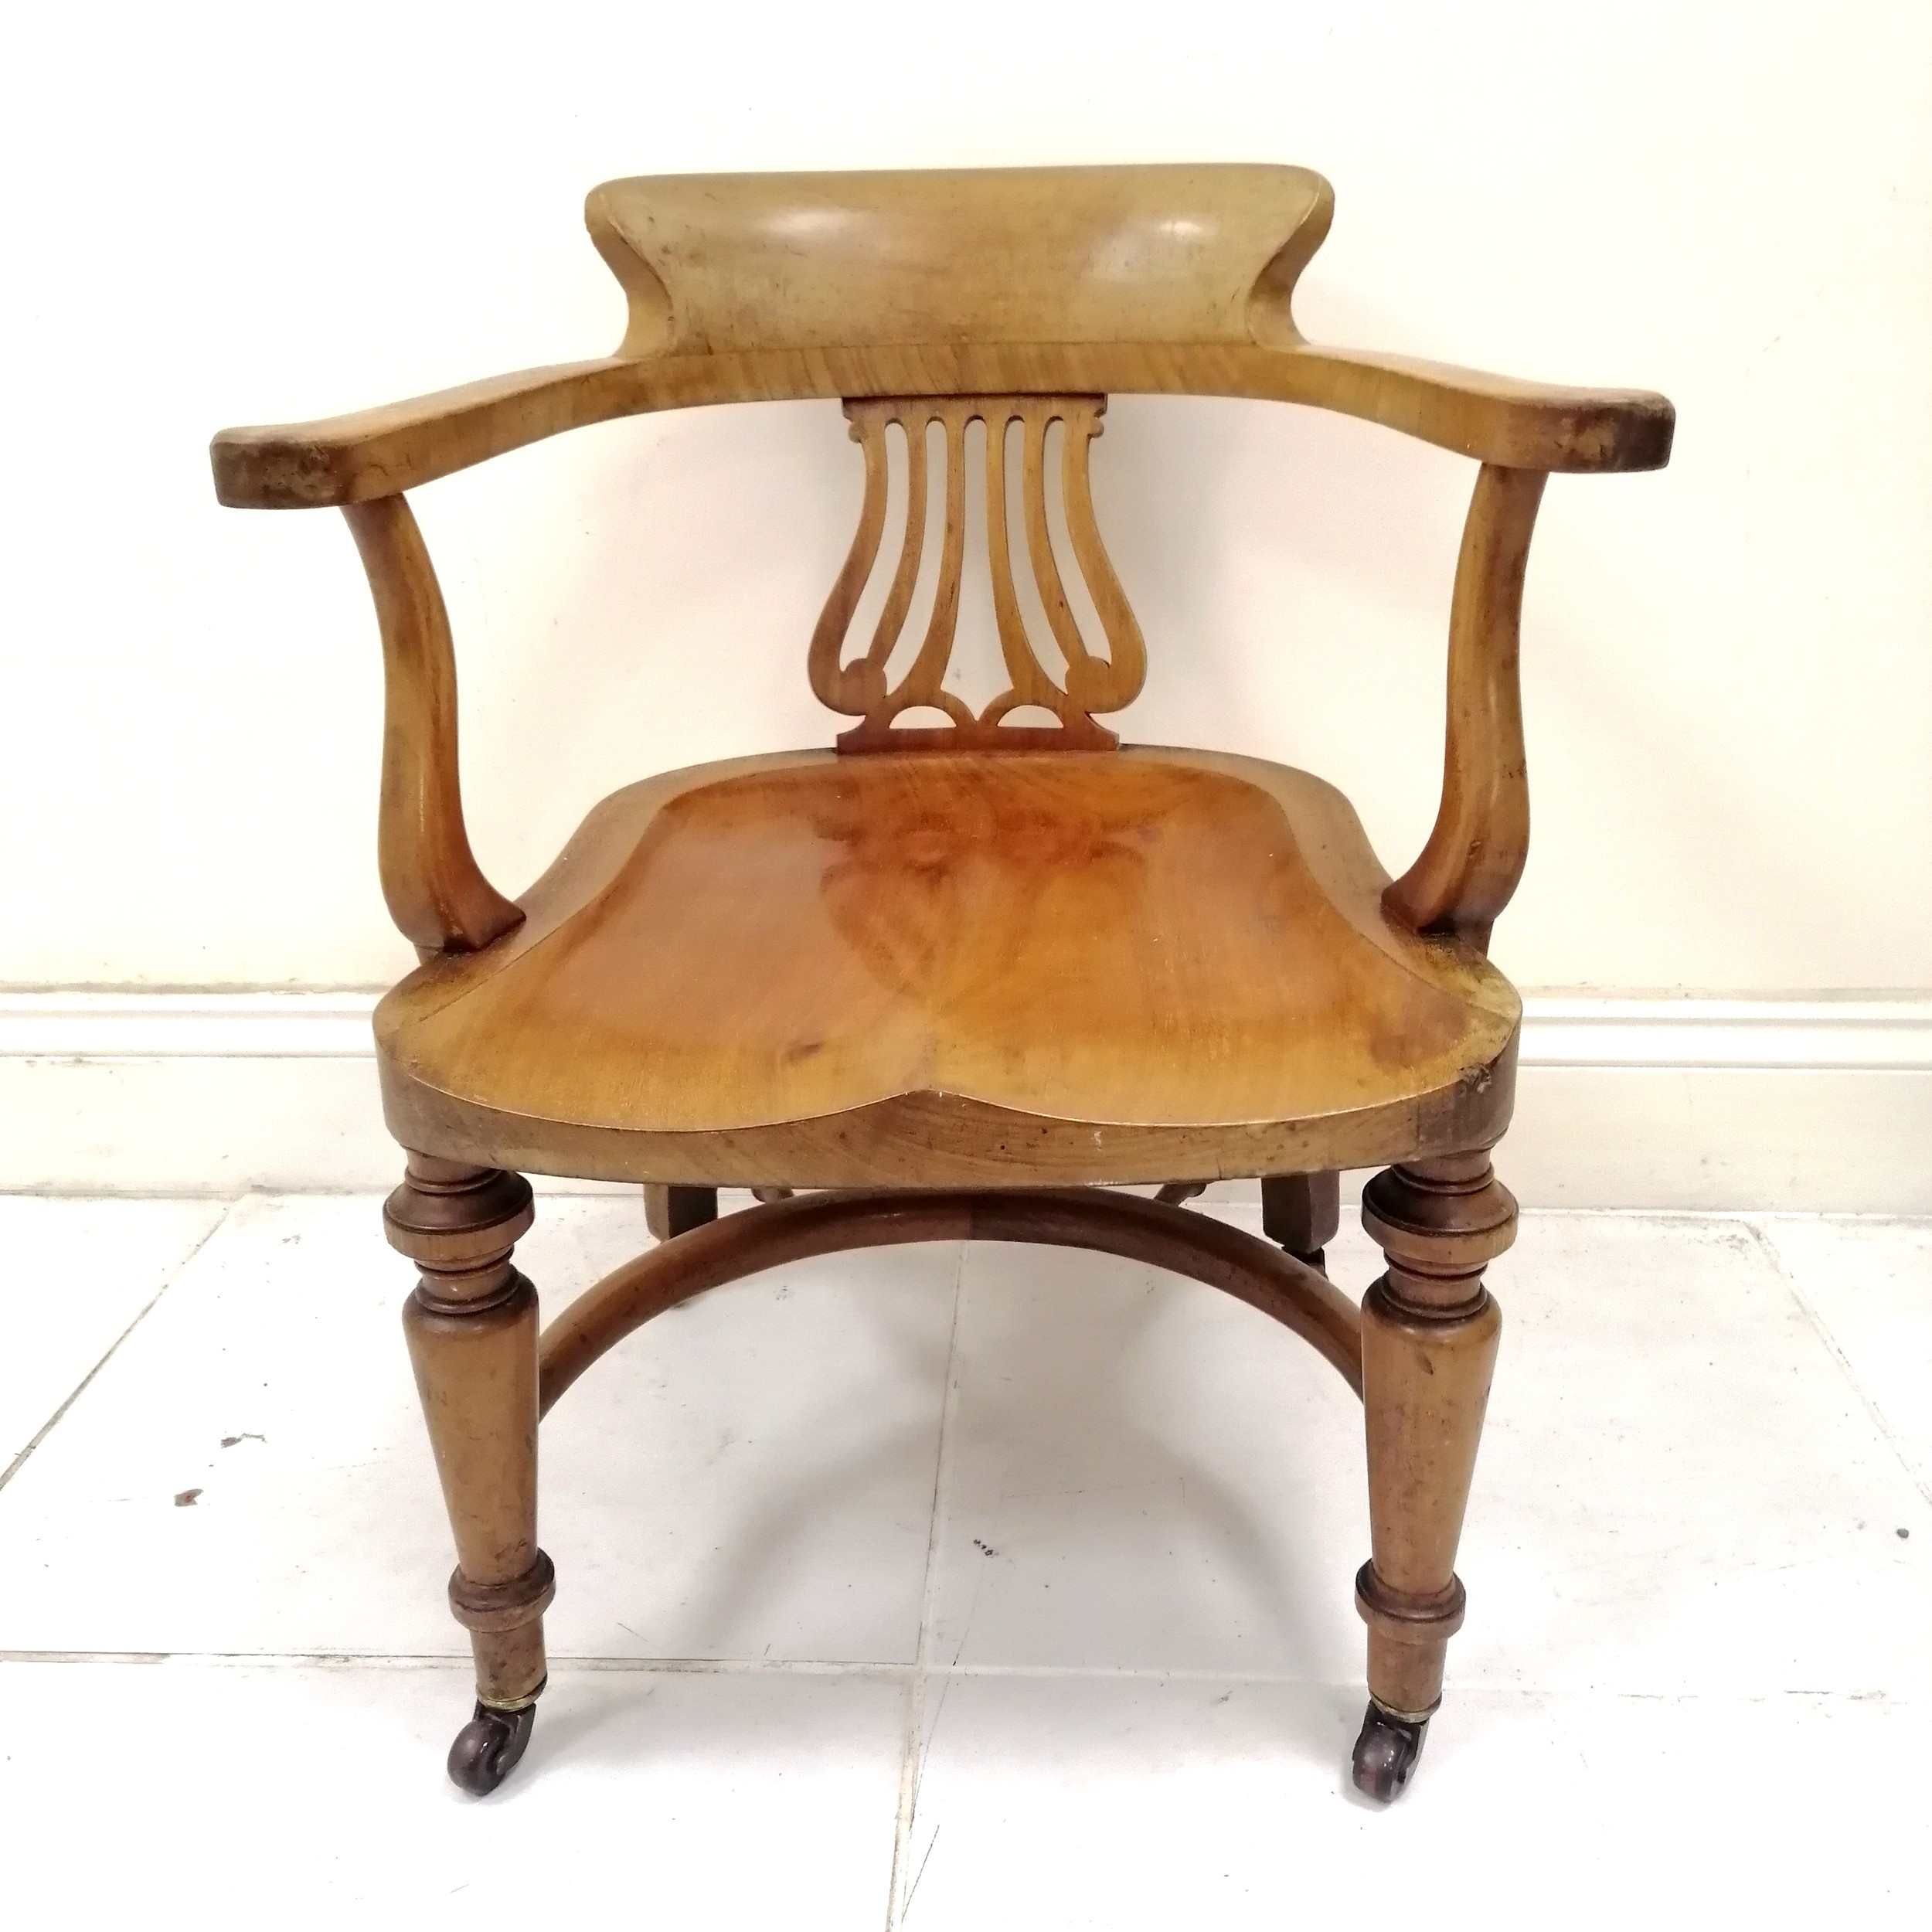 Antique bow back desk chair, on turned legs terminating ceramic castors, in good condition, 53 cm